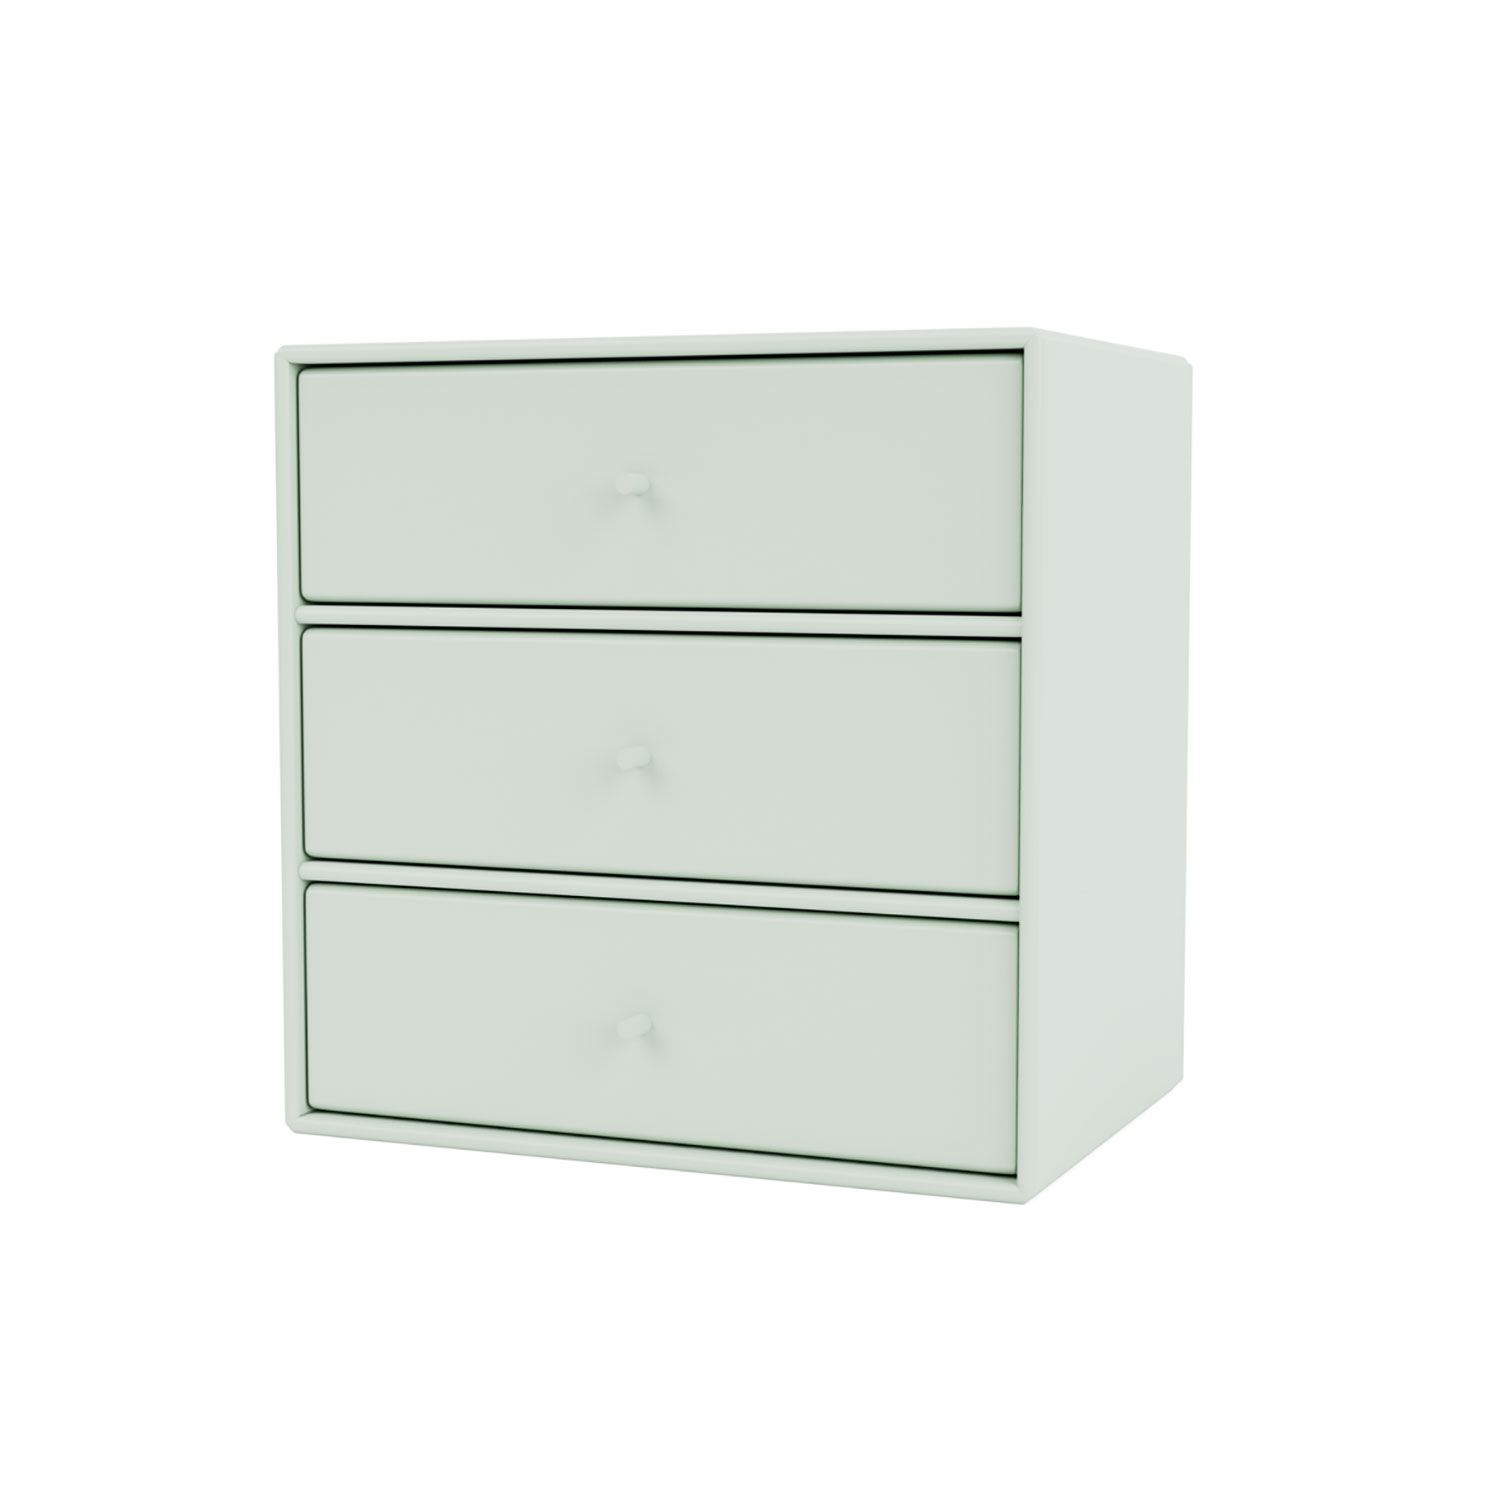 Mini 1007 with three drawers, 2 colors